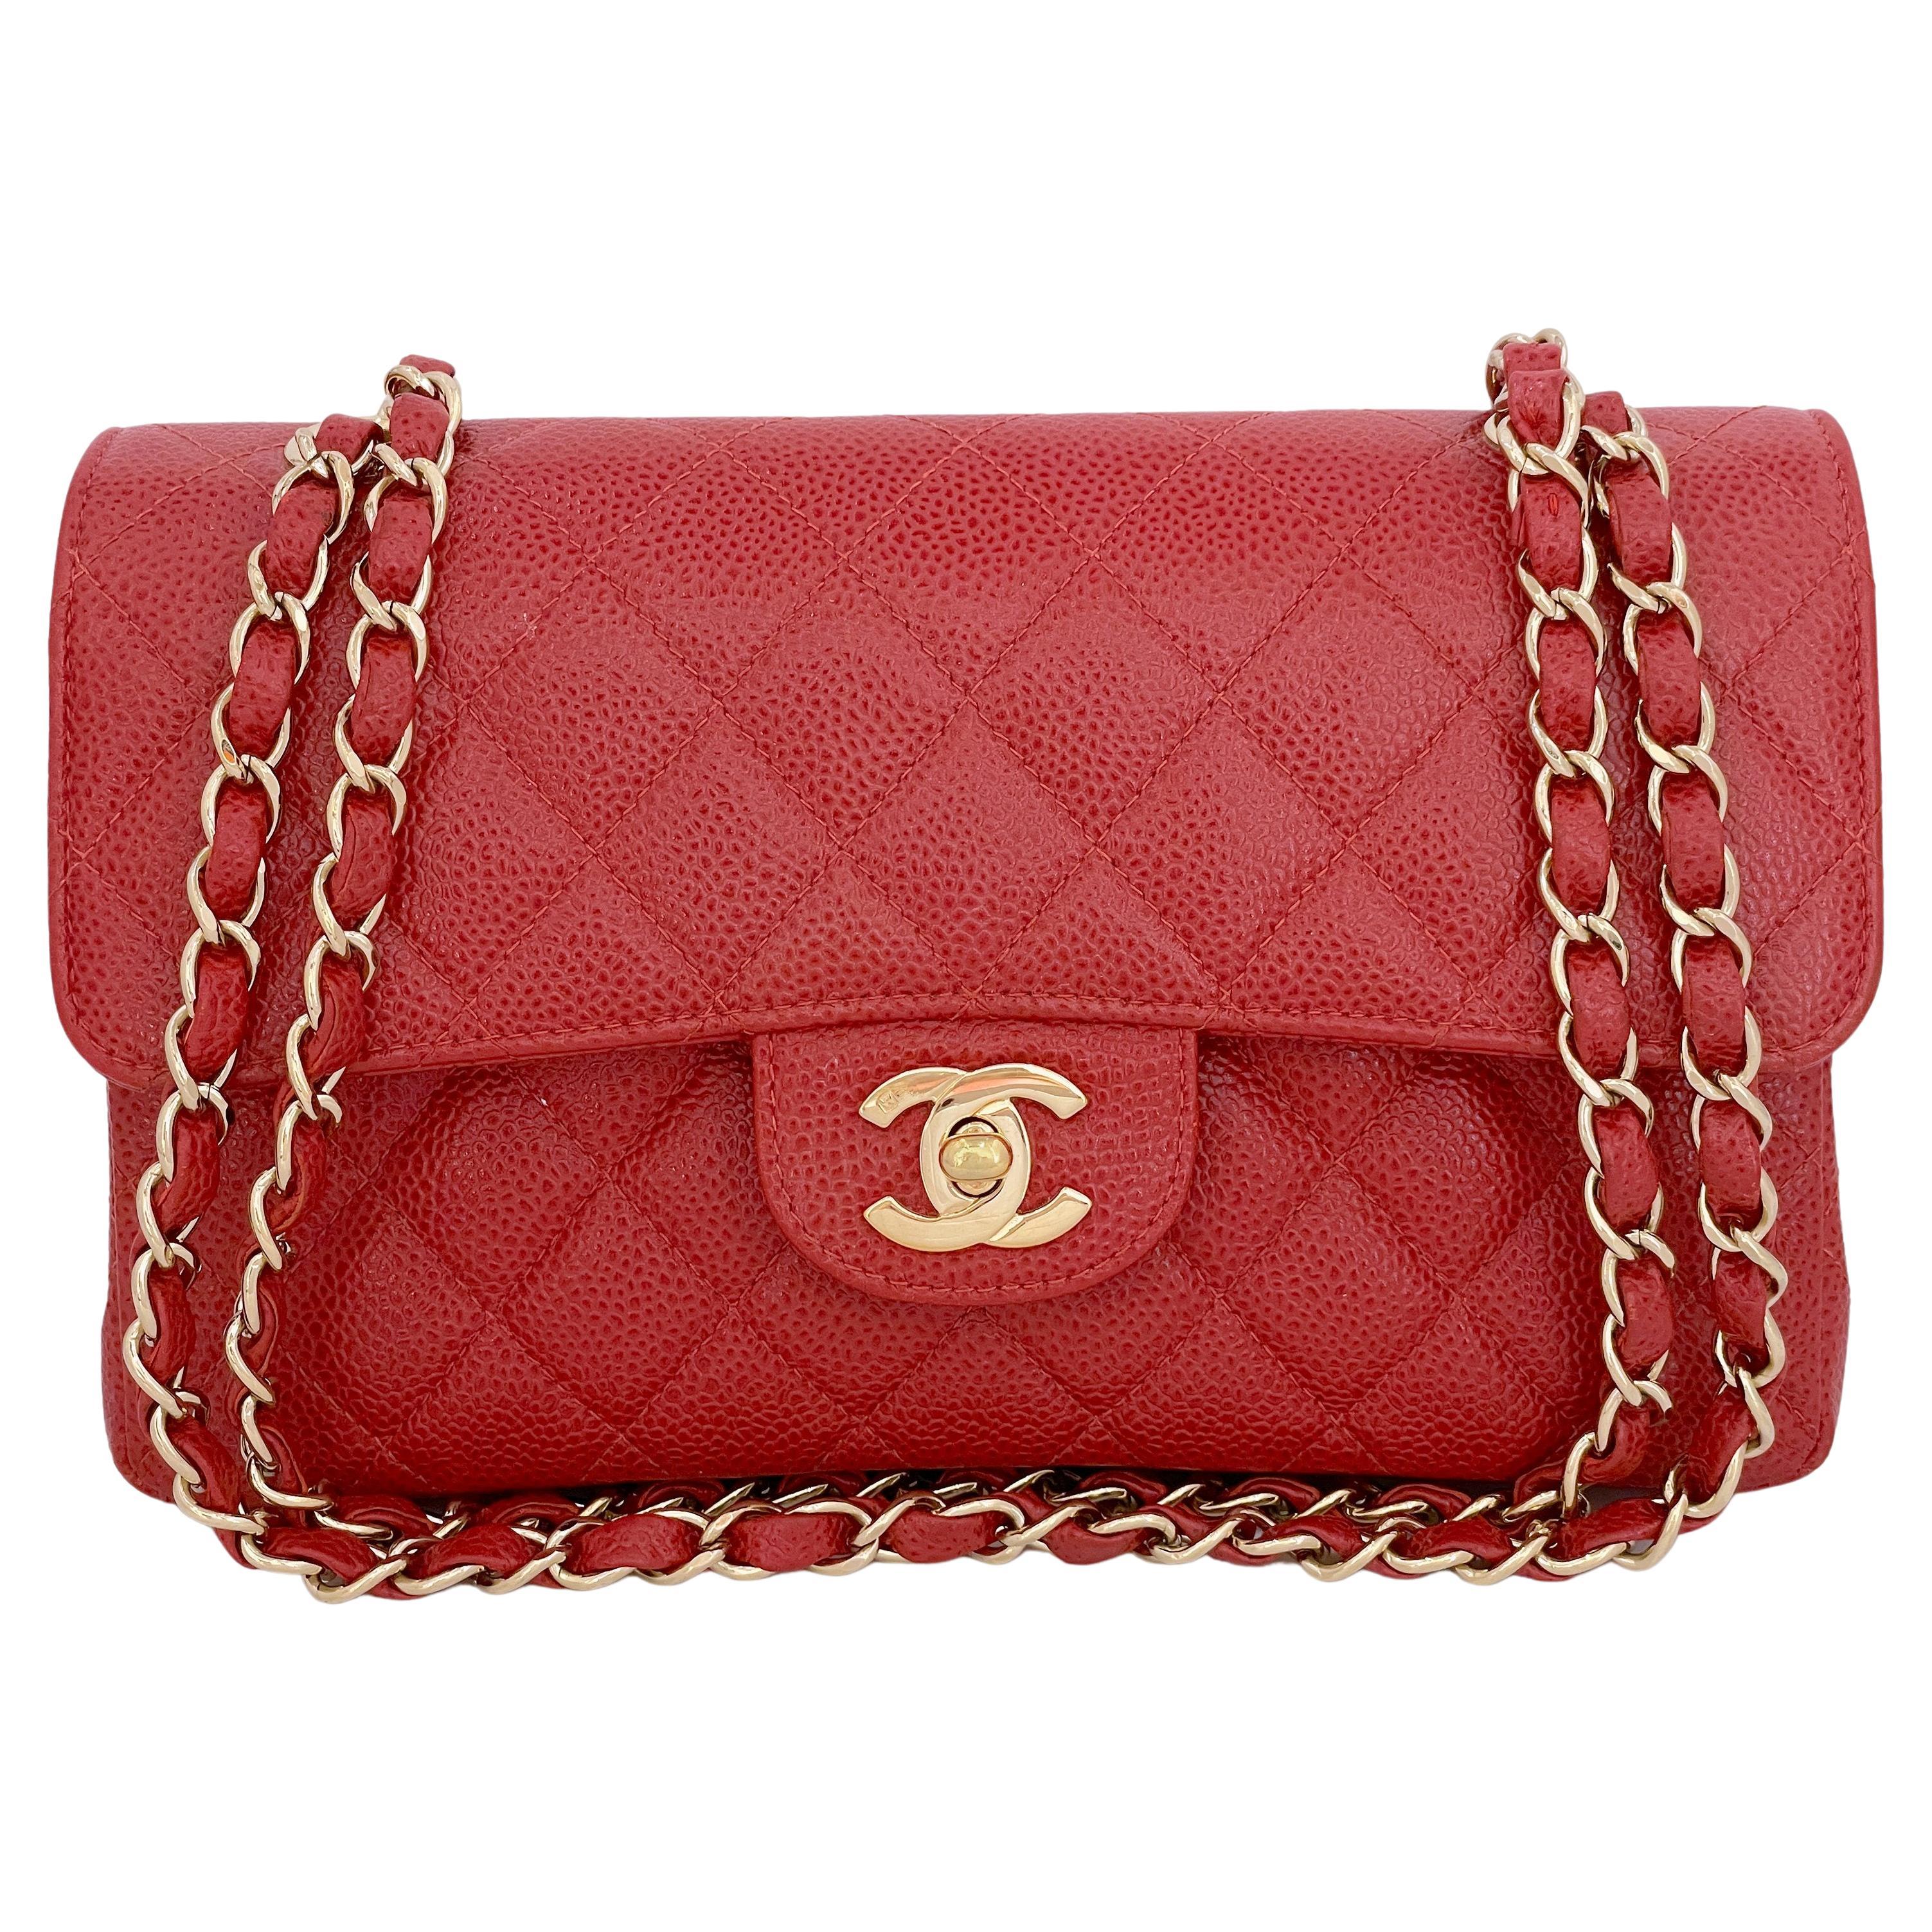 Chanel 2002 Vintage Red Caviar Small Classic Double Flap Bag 24K GHW 66396